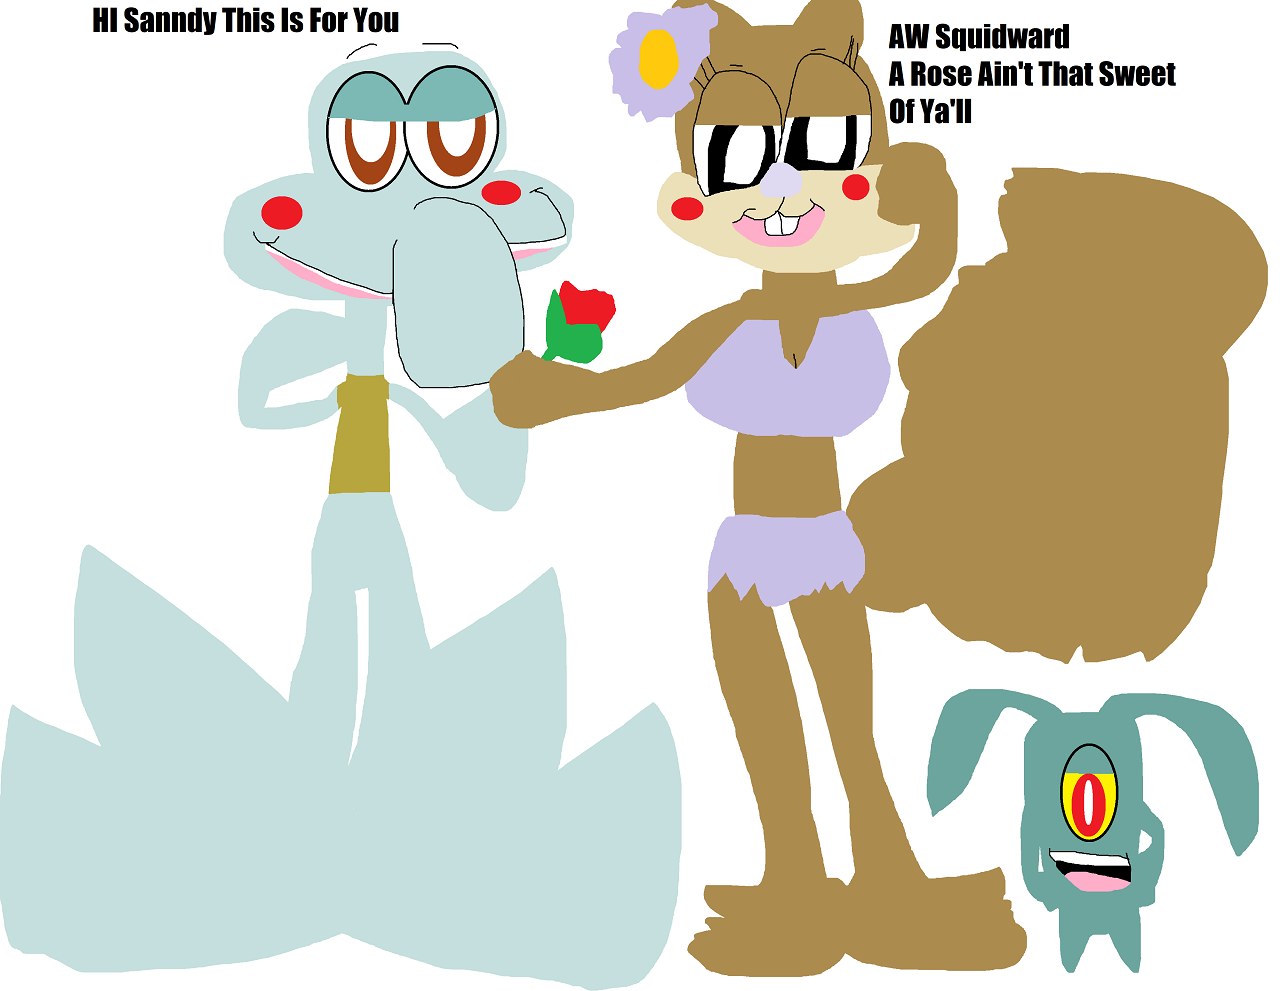 Hi Sandy This Is For You Alternate Faces And Random Plankton Added by Falconlobo